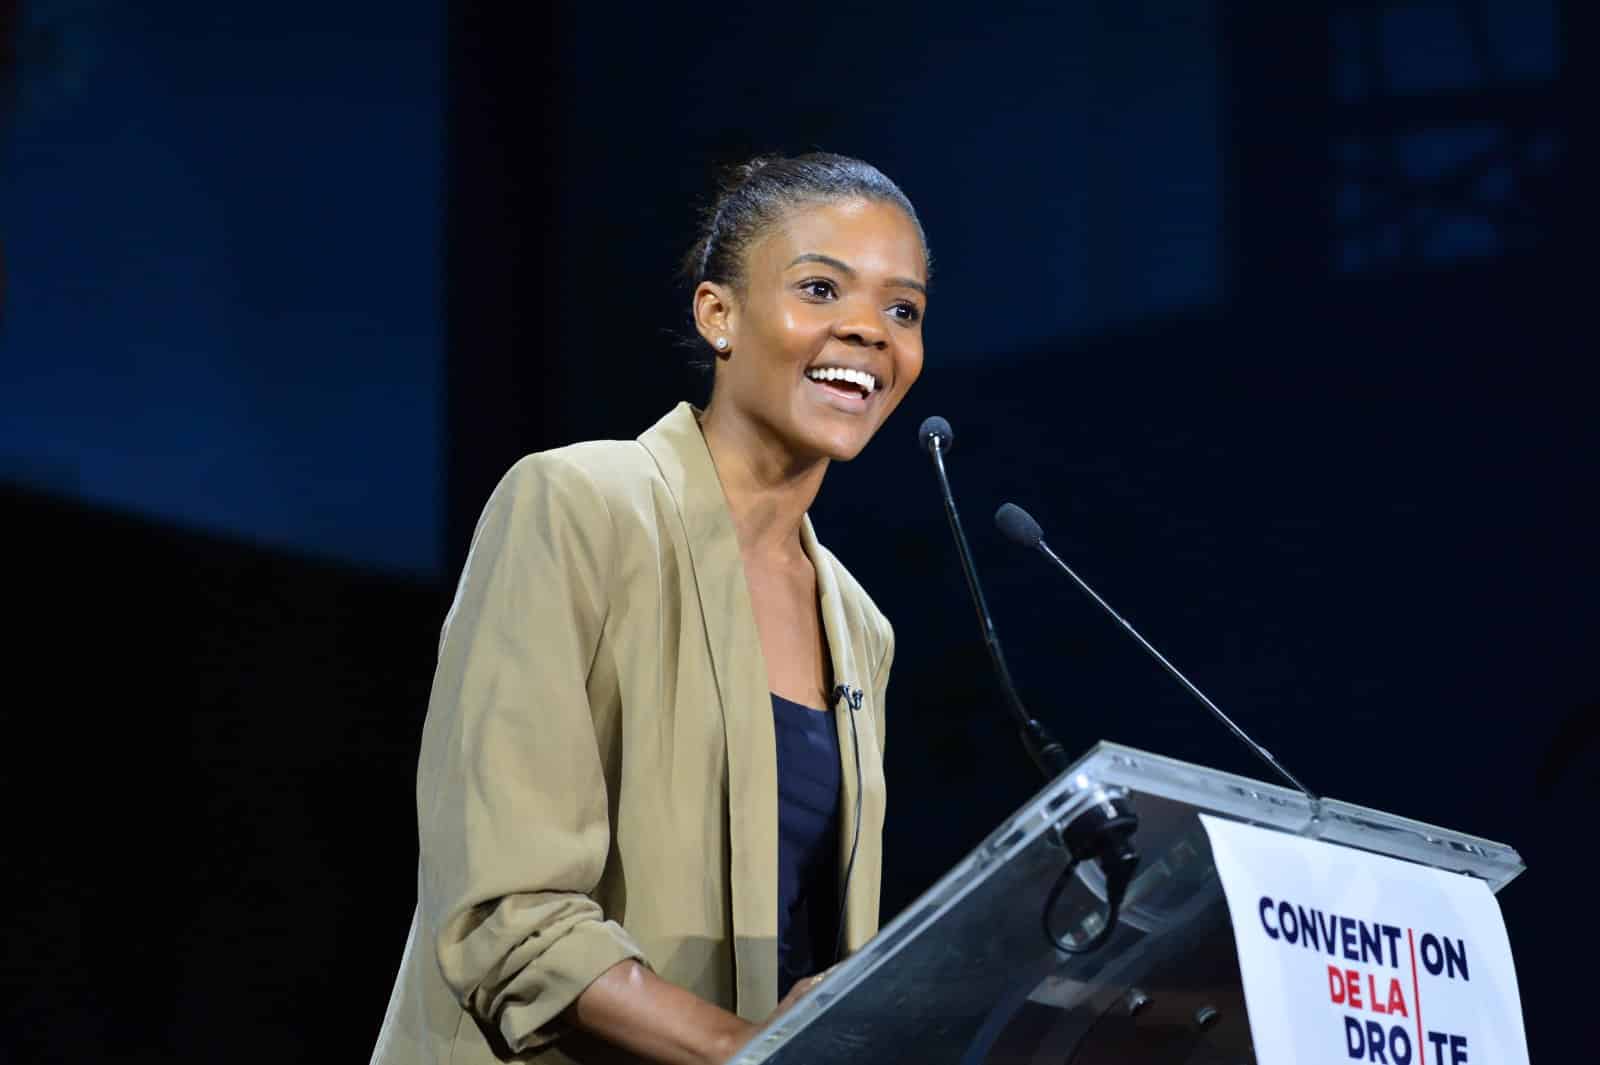 Image Credit: Shutterstock / Jo Bouroch <p><span>Conservative author and commentator Candace Owens is known for her criticism of the Democratic Party and her support for Donald Trump. Her views on race and politics make her a controversial and polarizing figure.</span></p>